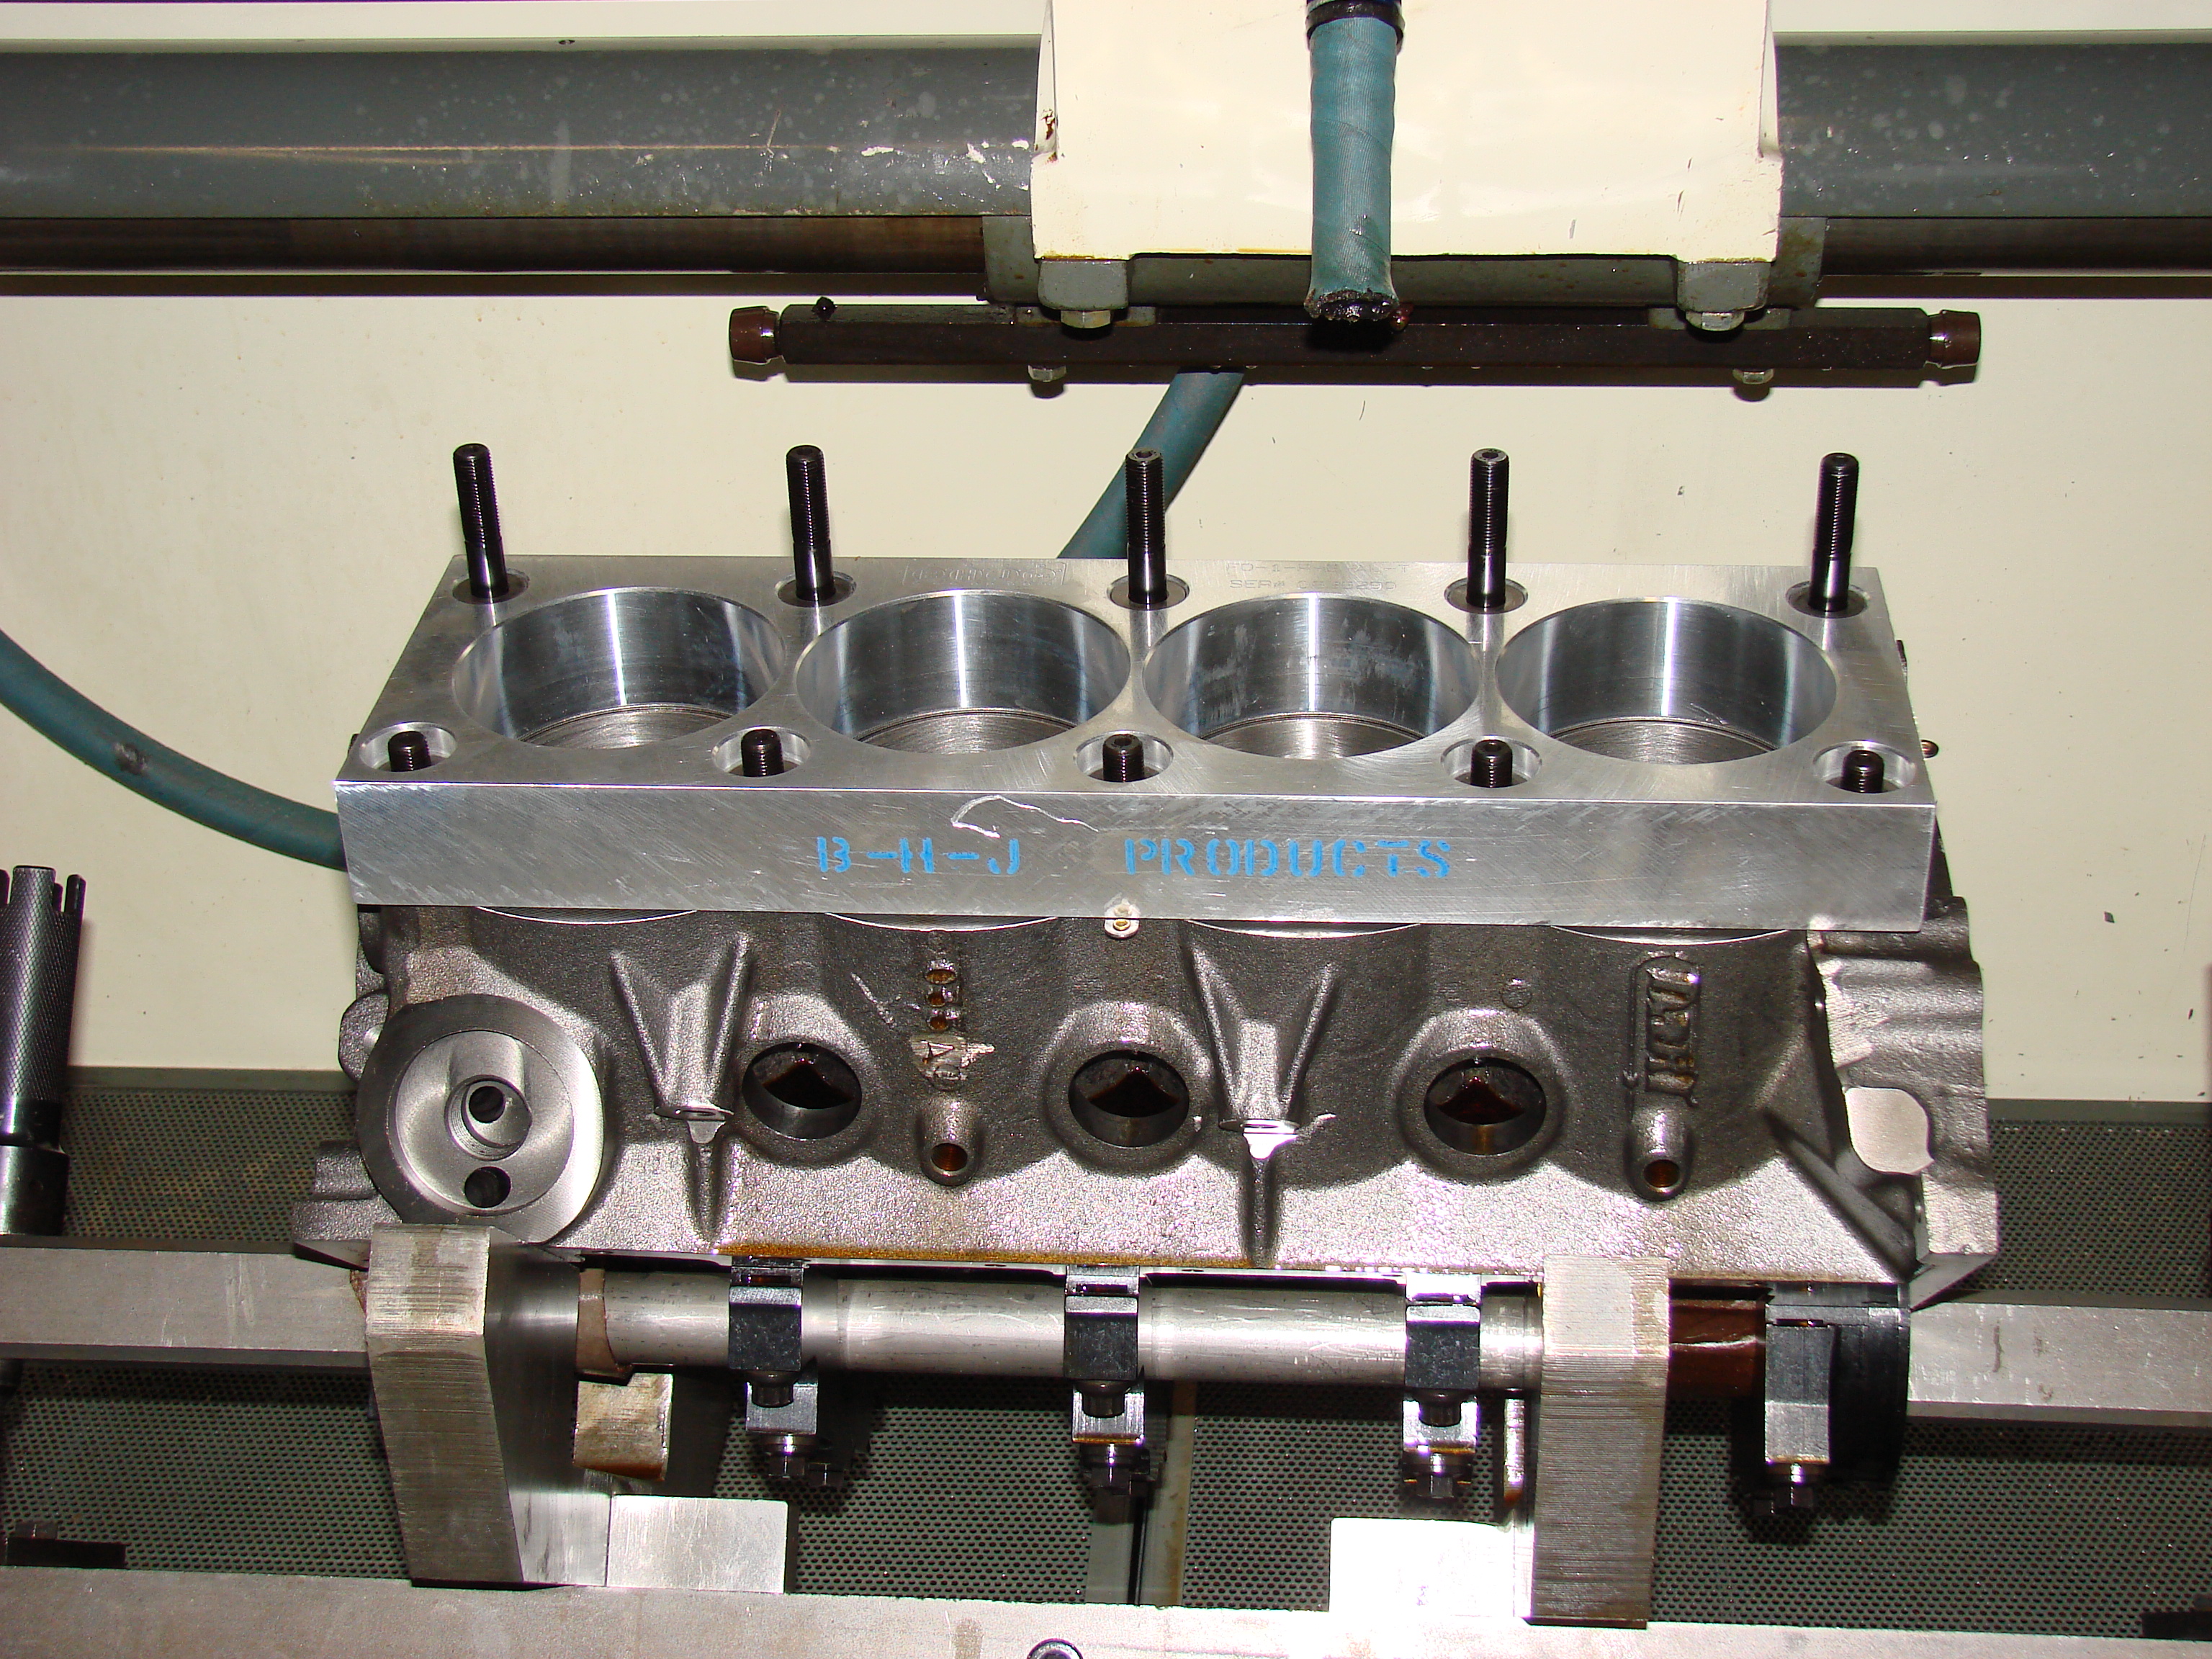 DART block being honed in CV616 with Torque plates